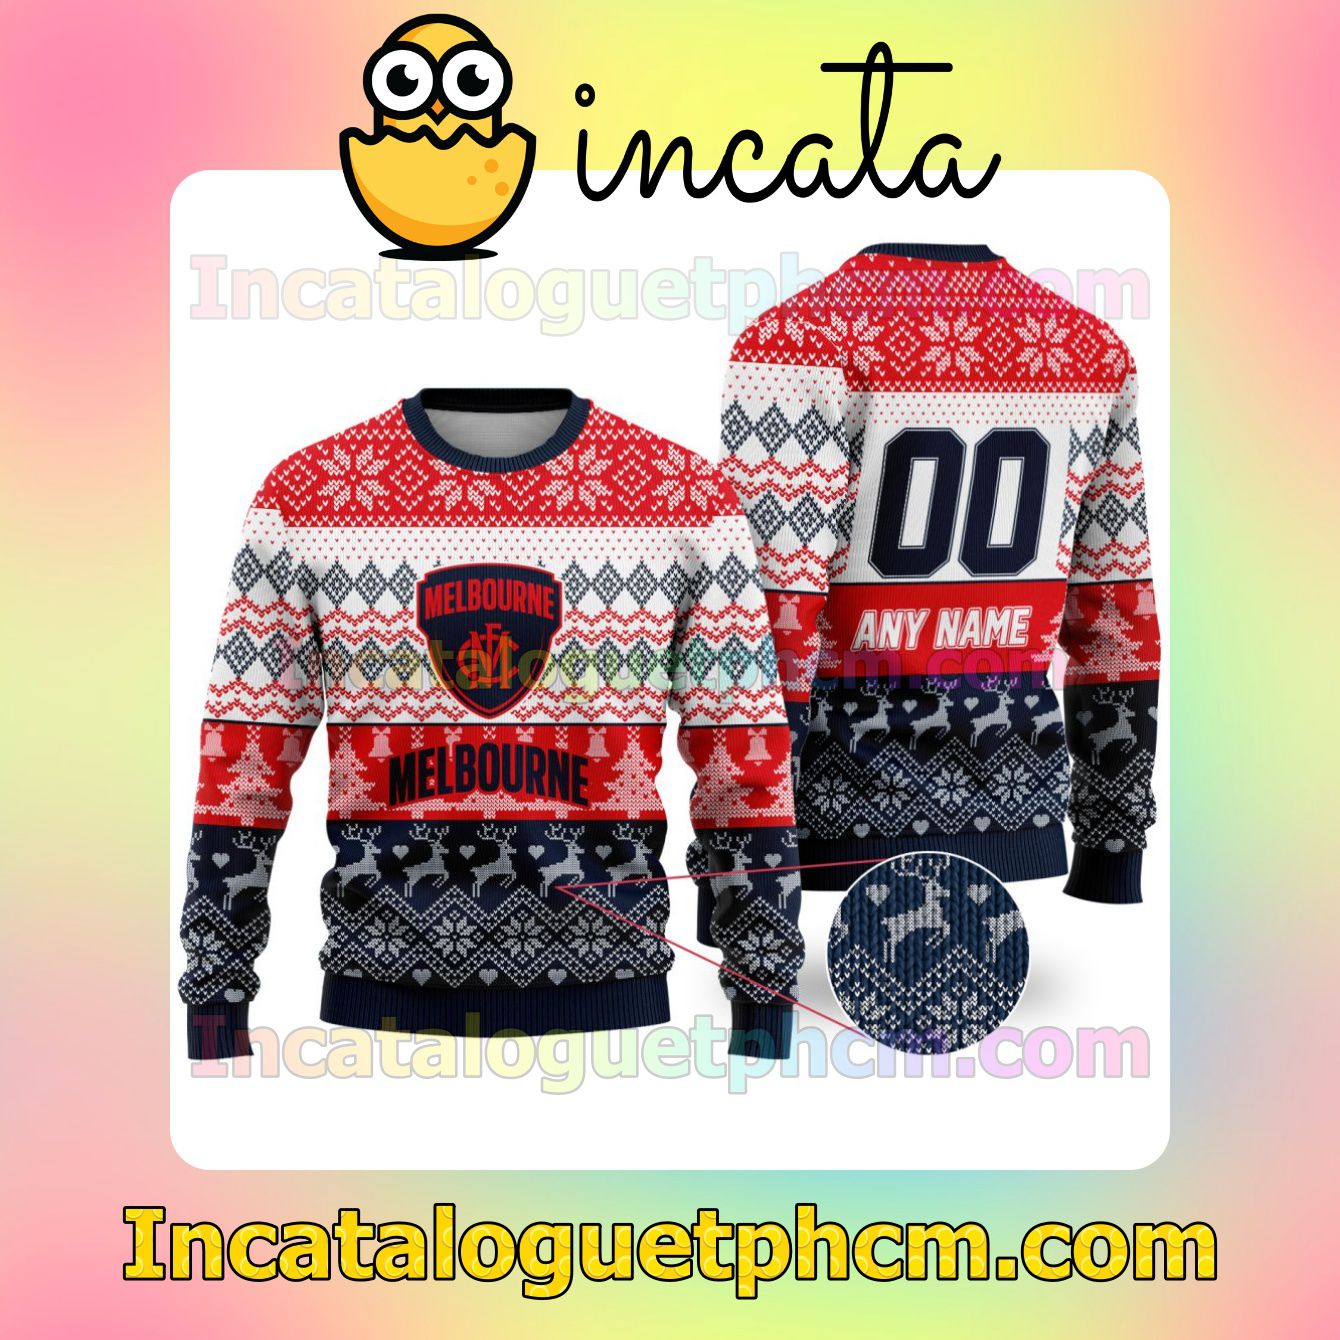 AFL Melbourne Football Club Ugly Christmas Jumper Sweater